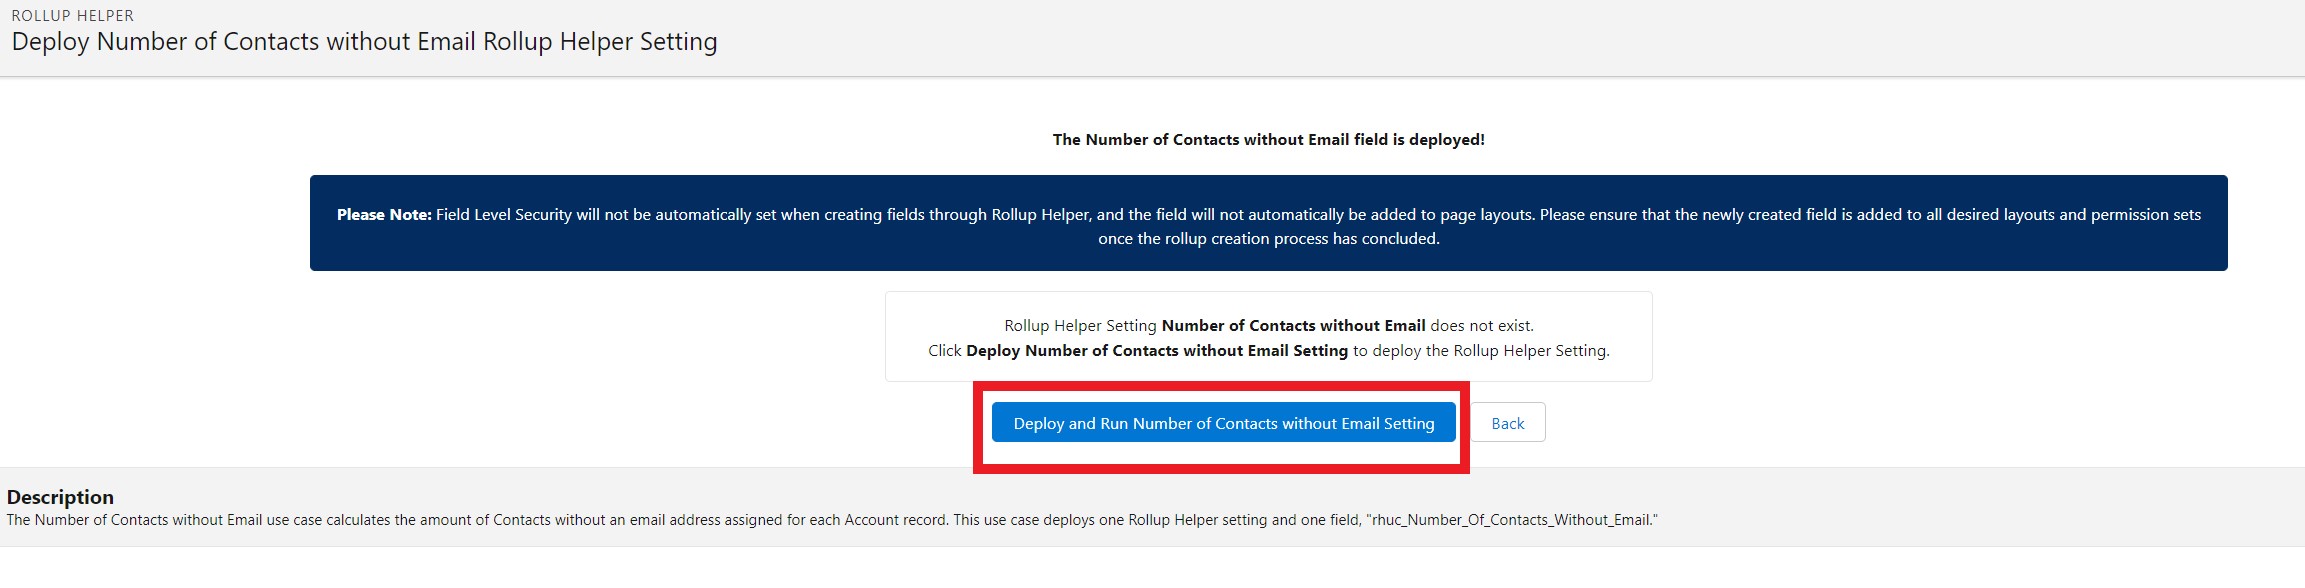 Number of Contacts without Email deploy setting